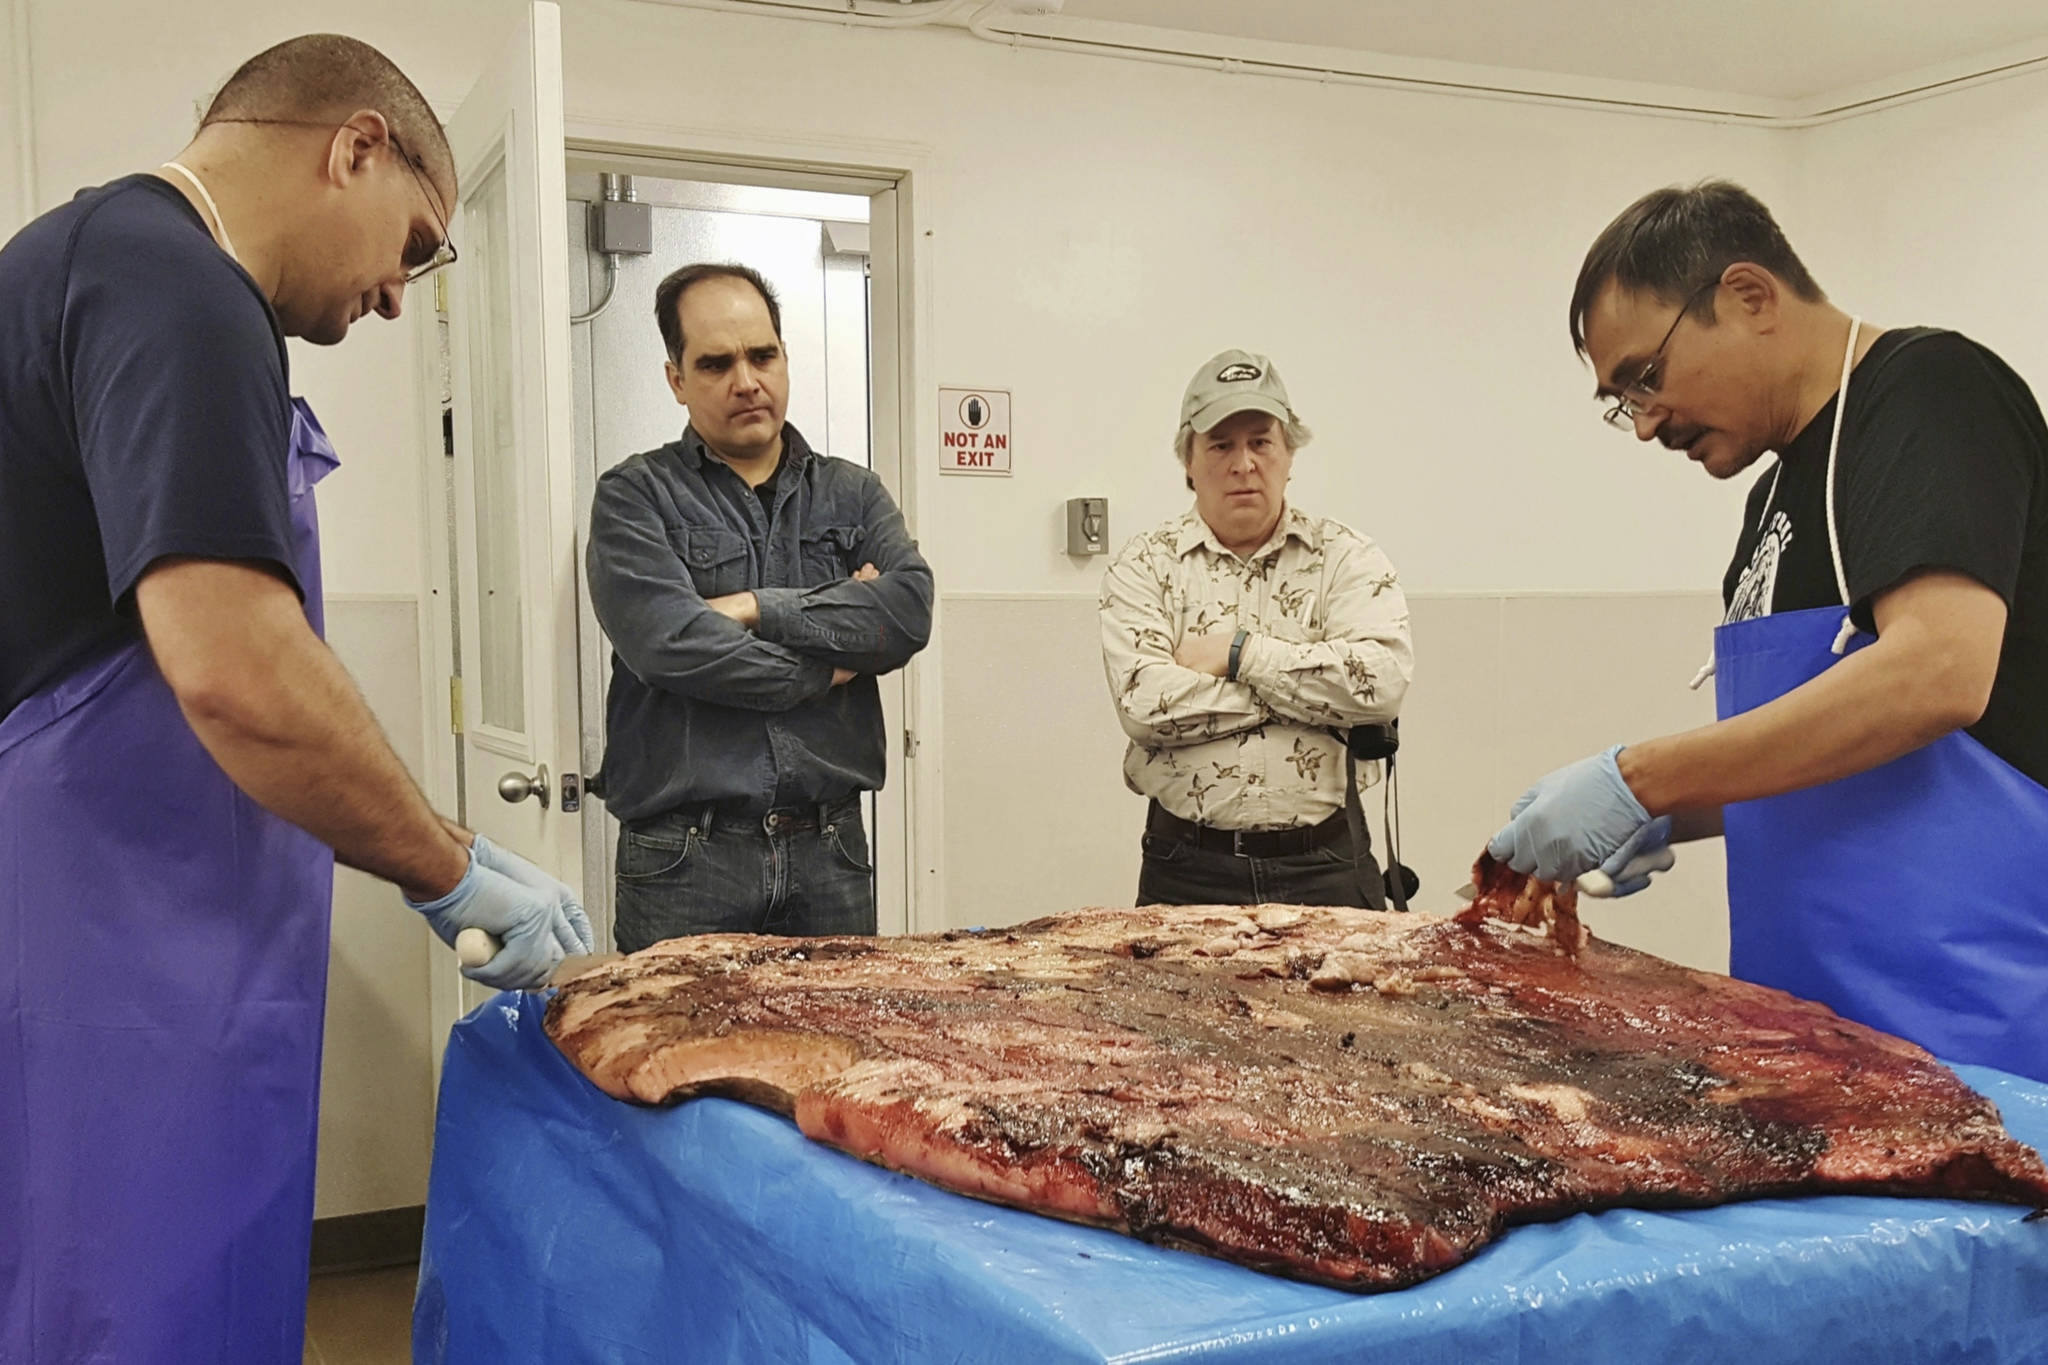 In this Oct. 28, 2016, photo provided by the Maniilaq Association, Alex Whiting, left, and Cyrus Harris, right, are observed by Chris Sannito, second from left, and Brian Himelbloom, third from left, of the Kodiak Seafood and Marine Science Center as they trim and clean seal blubber in Kotzebue, Alaska. In January 2021, the Alaska Department of Environmental Conservation approved seal oil to be served at a Maniilaq elder care home, believed to be a first for seal oil in the U.S.  (Maniilaq Association via AP)